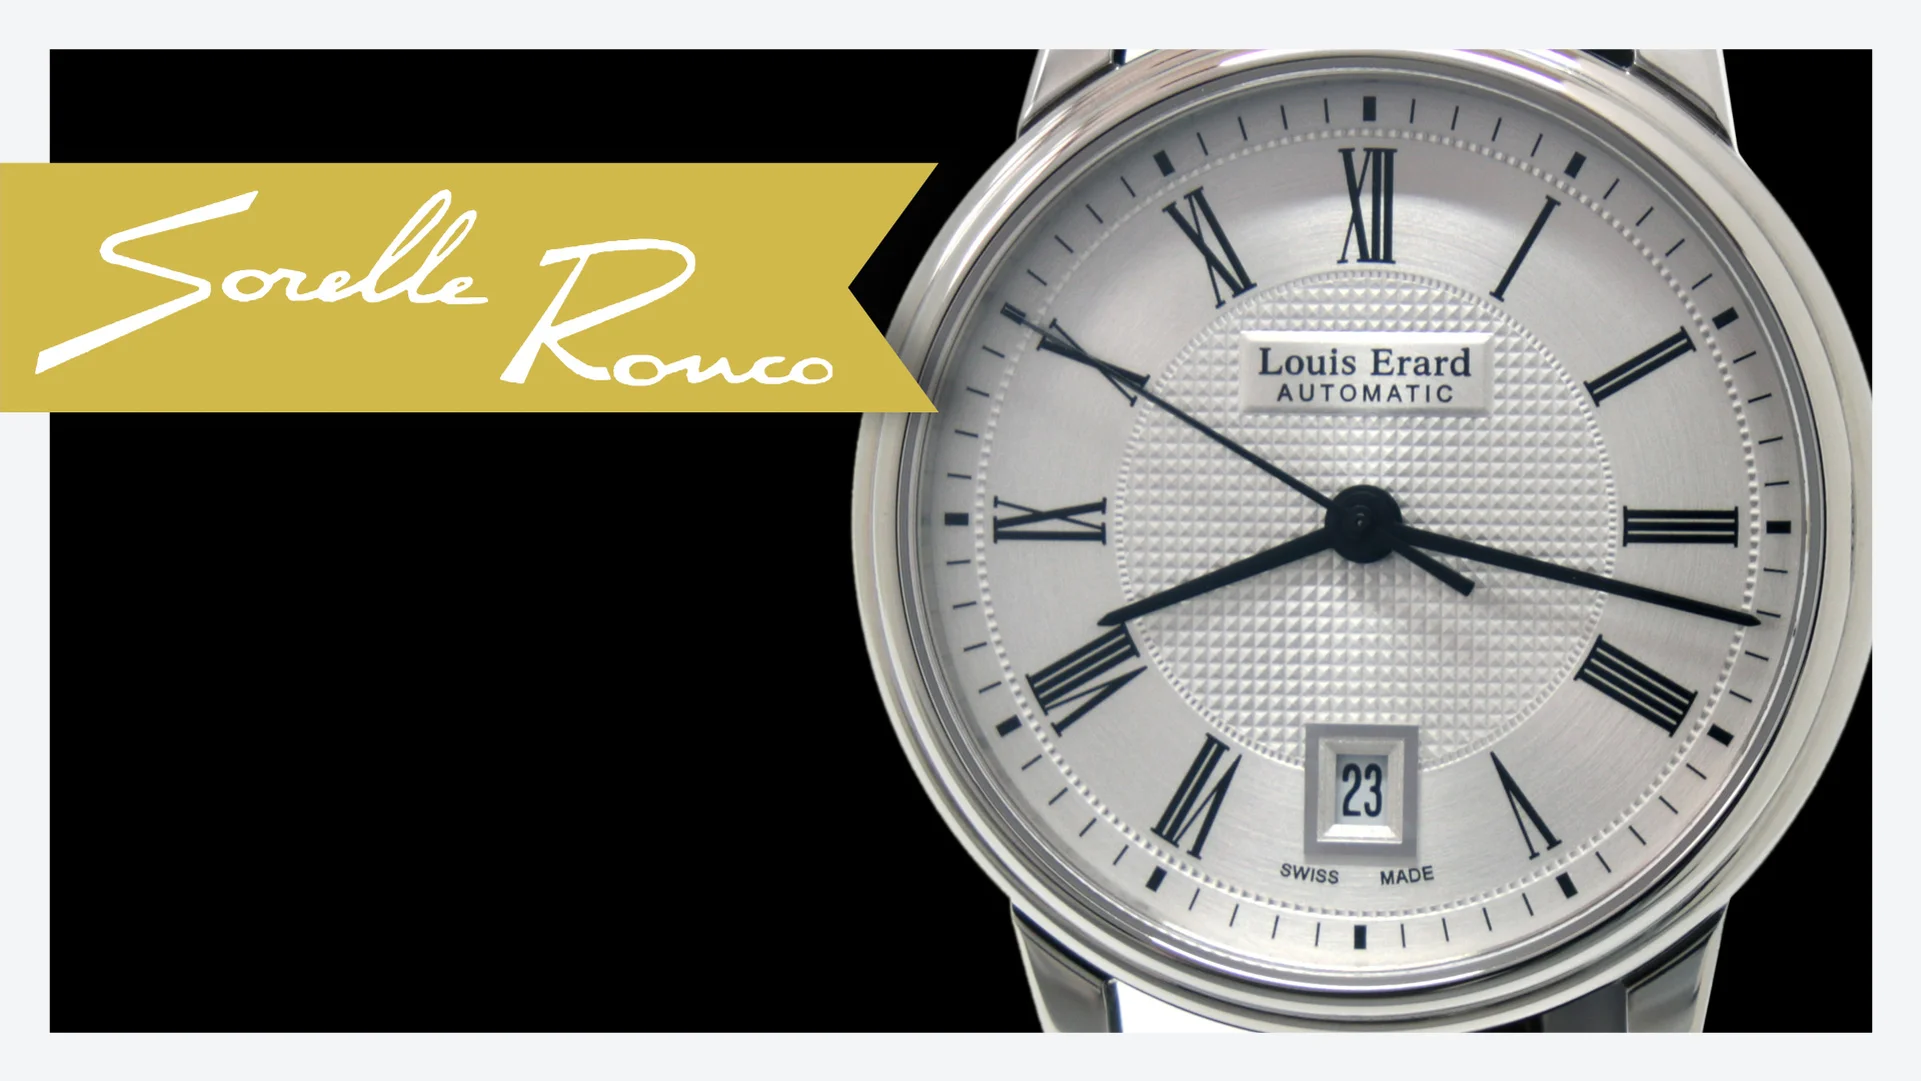  Louis Erard Heritage Collection Swiss Automatic Silver Dial  Men's Watch 78225AA11.BDC21 : Louis Erard: Clothing, Shoes & Jewelry